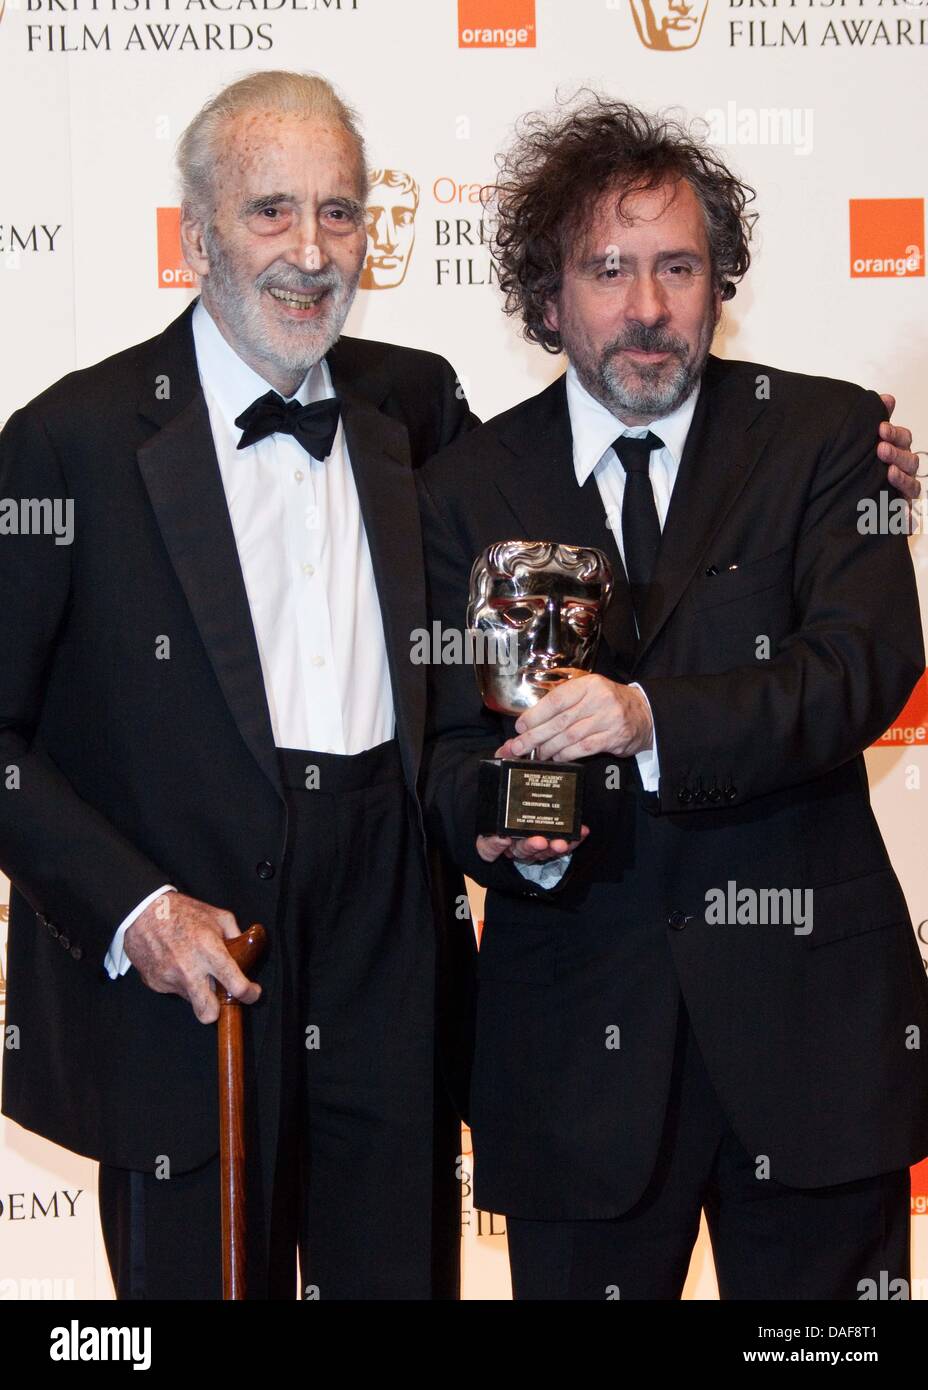 British actor Christopher Lee and director Tim Burton (R) pose in the  winner's pressroom of the British Academy Film Awards BAFTA at Royal Opera  House in London, Great Britain, 13 February 2011.